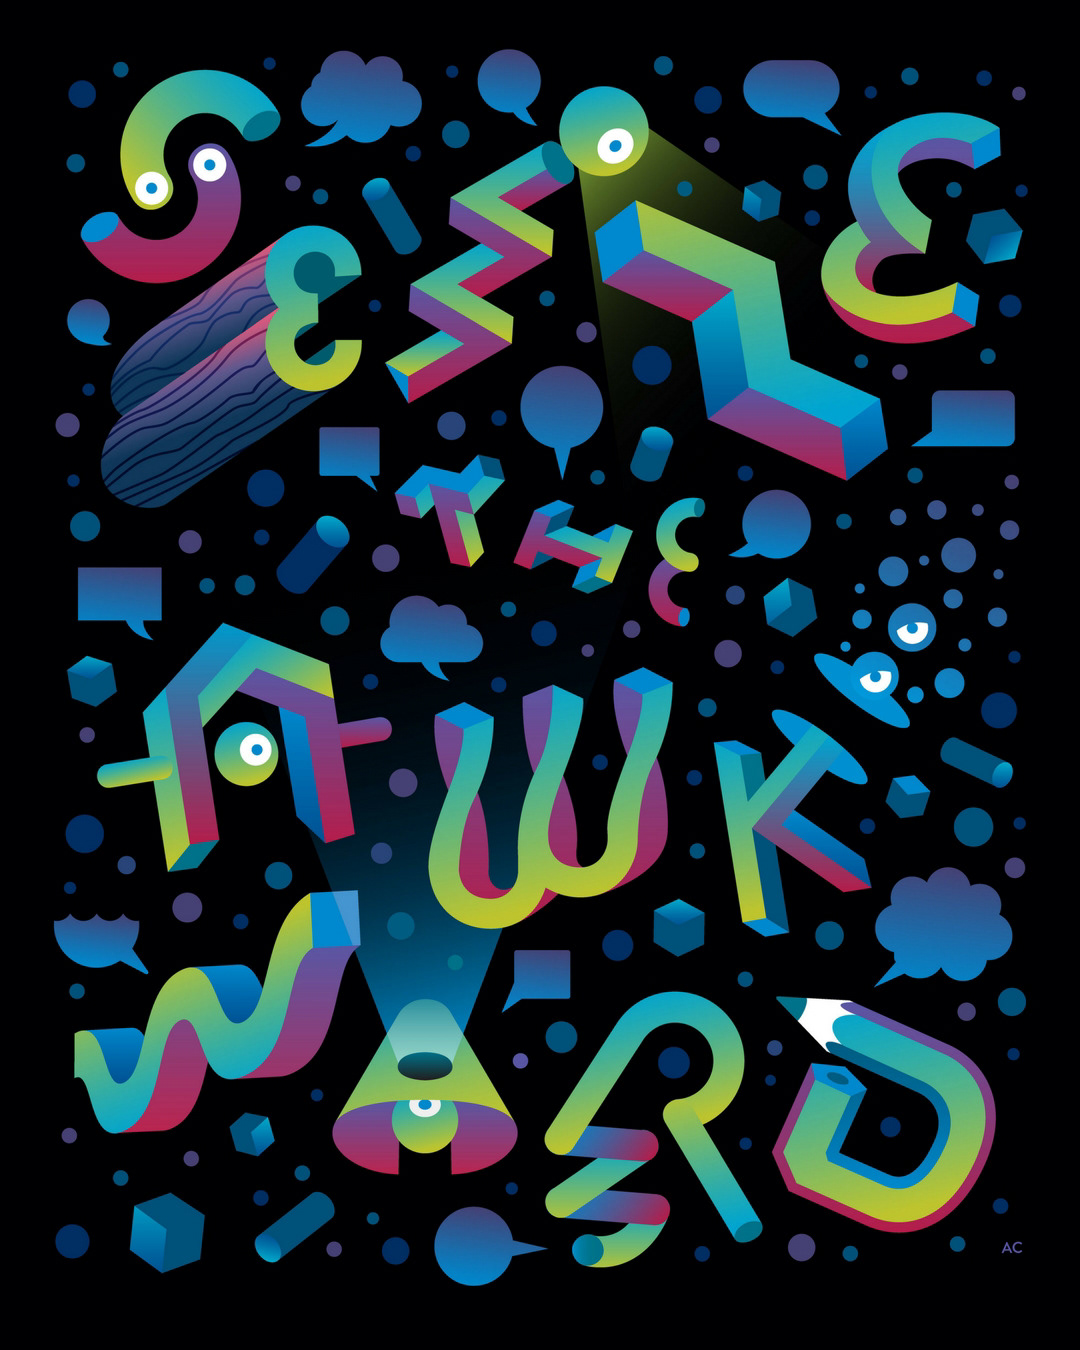 seize the awkward campaign mental health depression anxiety poster lettering typographic type